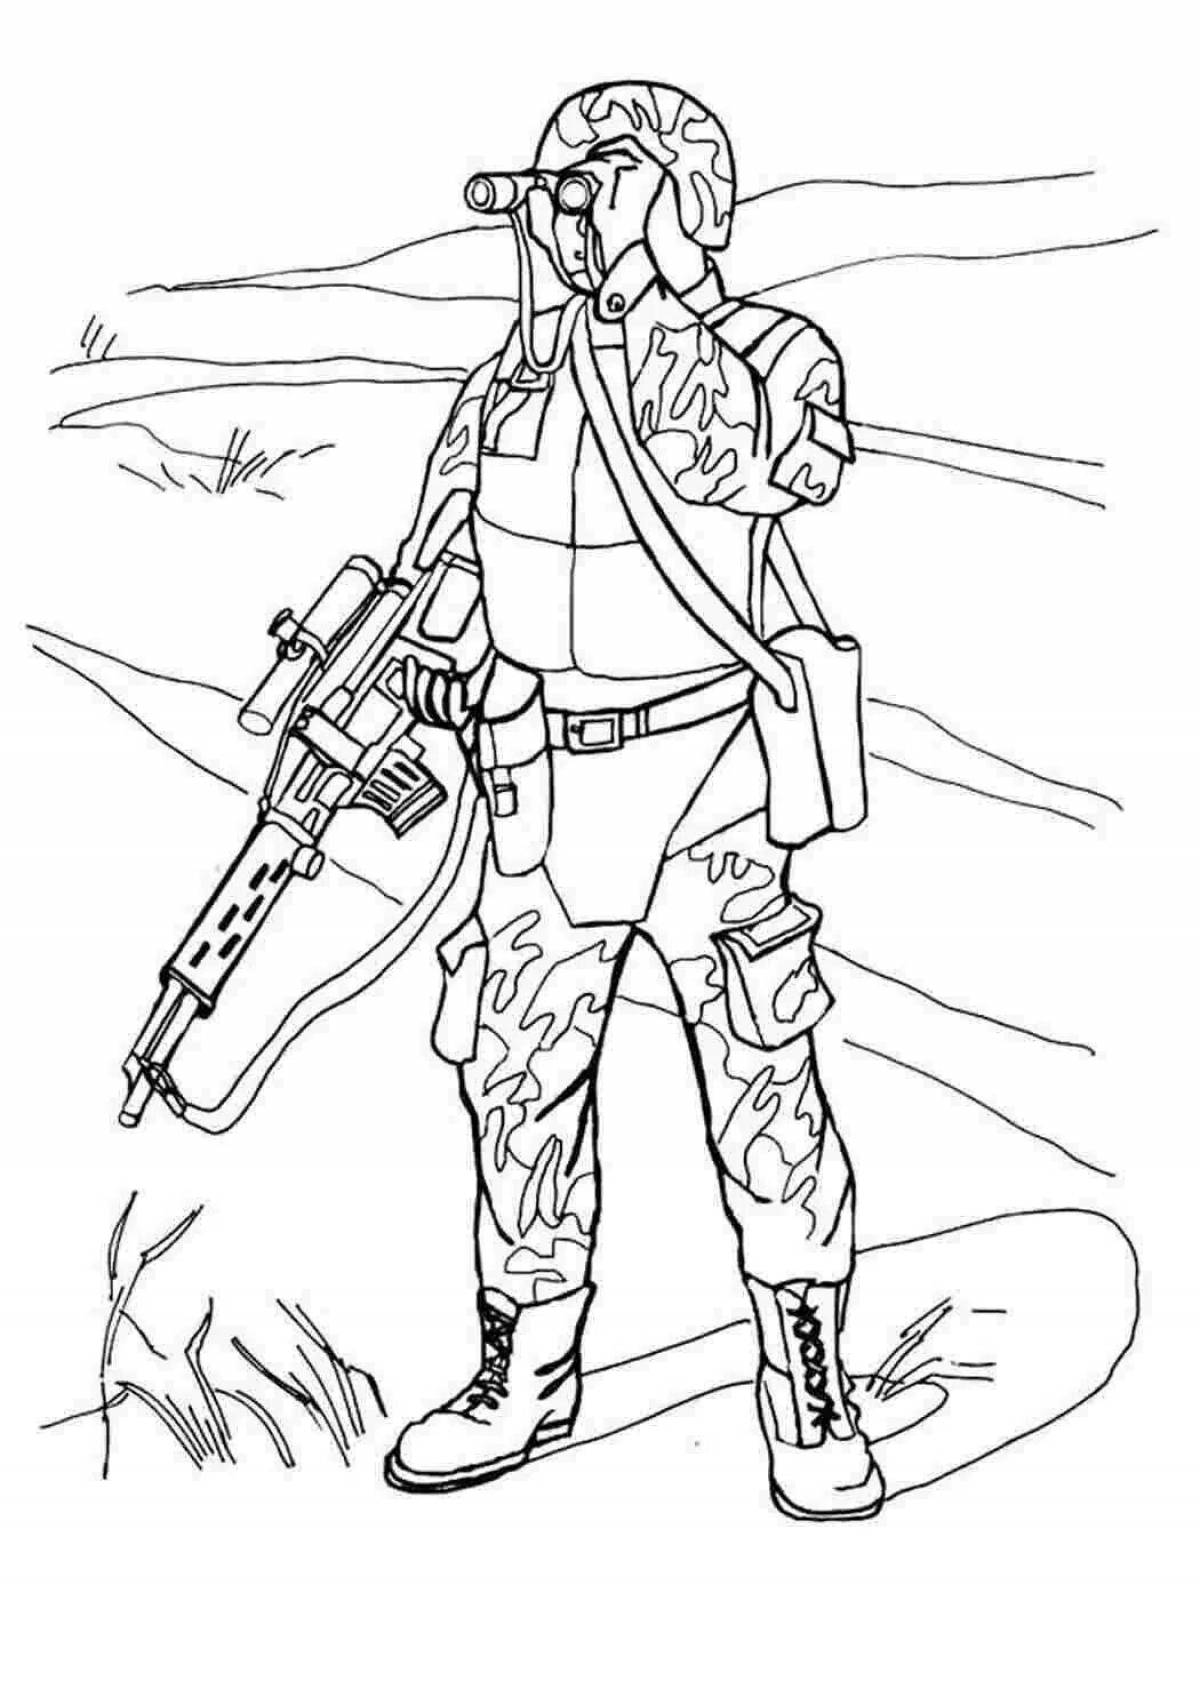 Animated military coloring pages